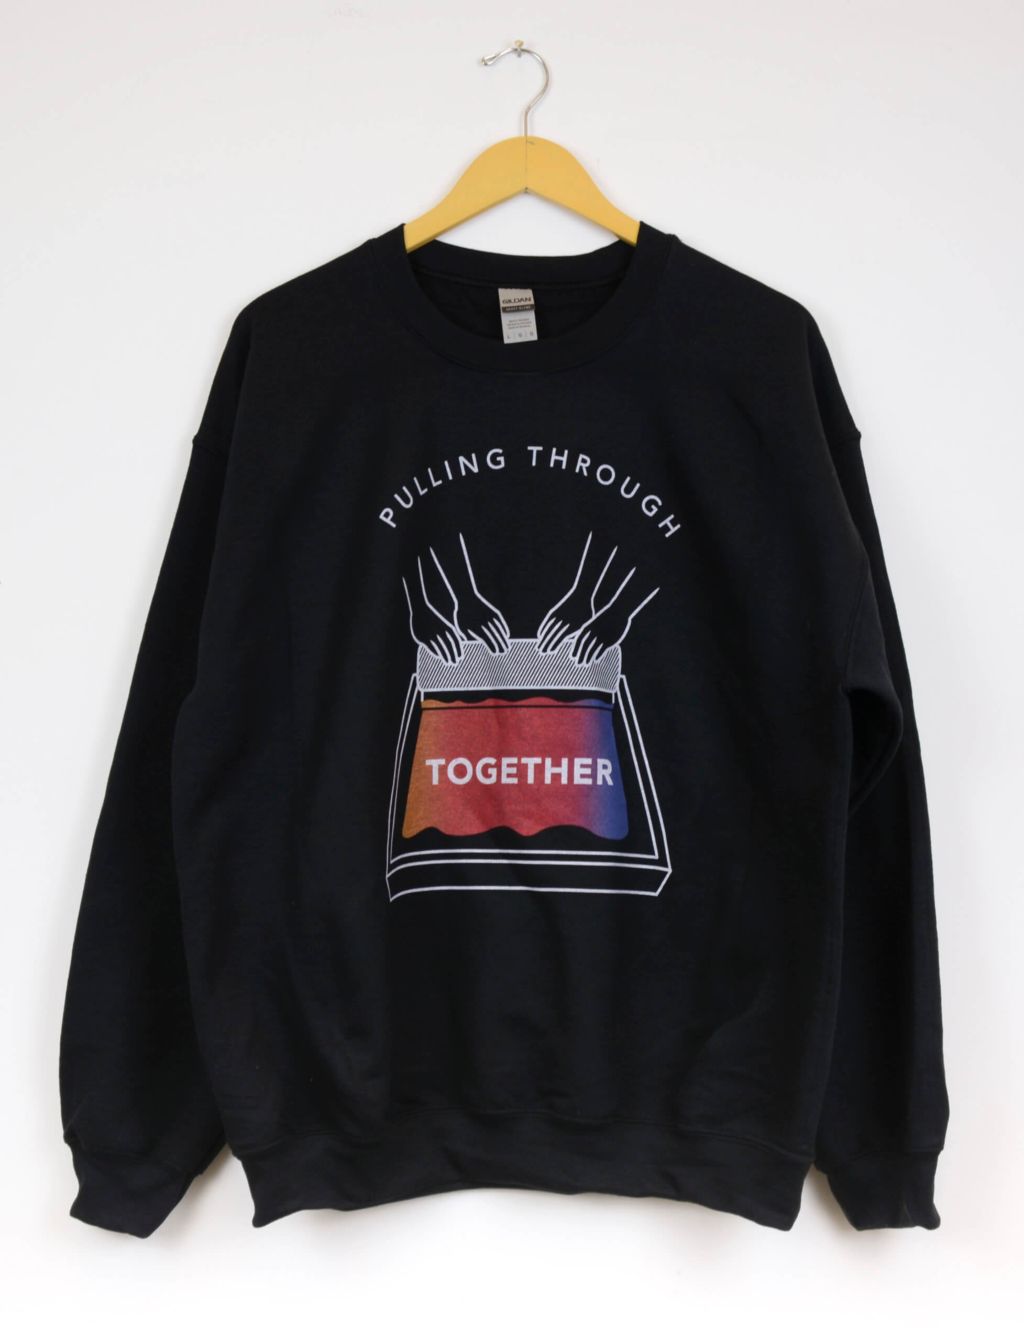 Black sweatshirt with graphic illustration of two pairs of hands pulling multicolour ink on a screen with a squeegee. The words in the graphic read "Pulling Through Together". The words ‘Pulling Through’ arch above the hands, and the word ‘Together’ is written on the silkscreen.